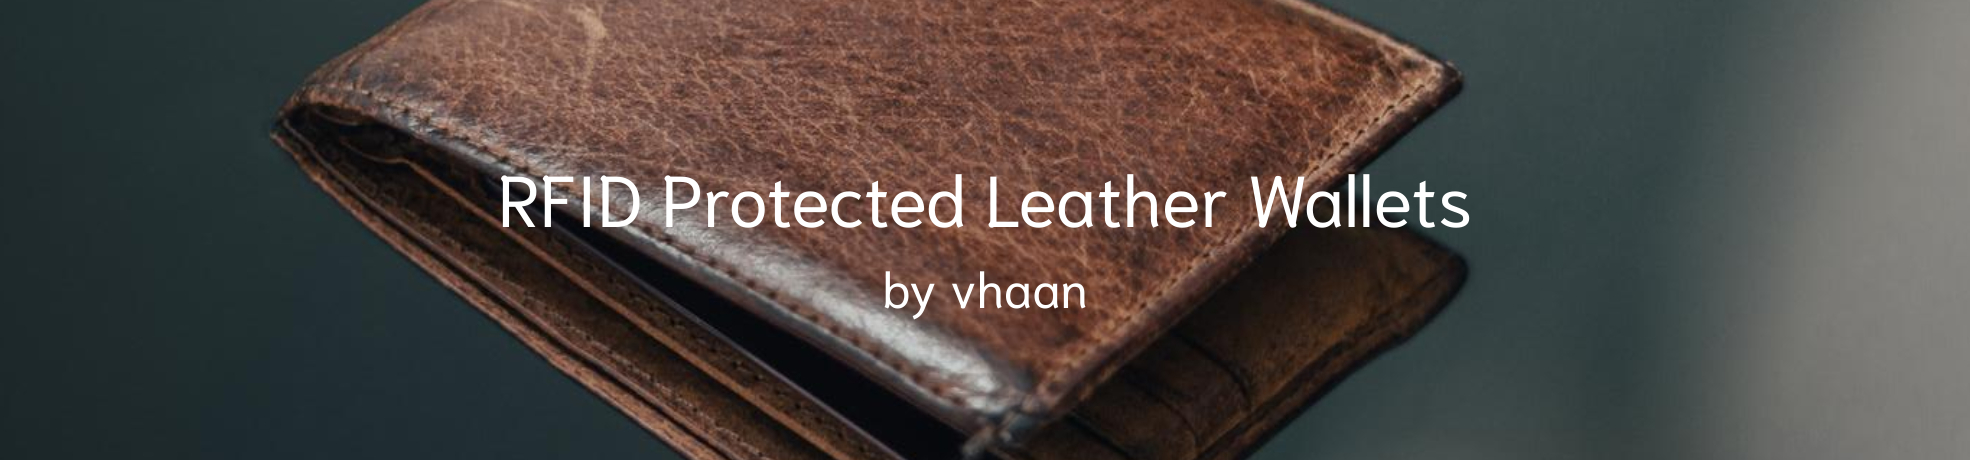 RFID Protected Premium Leather Wallet